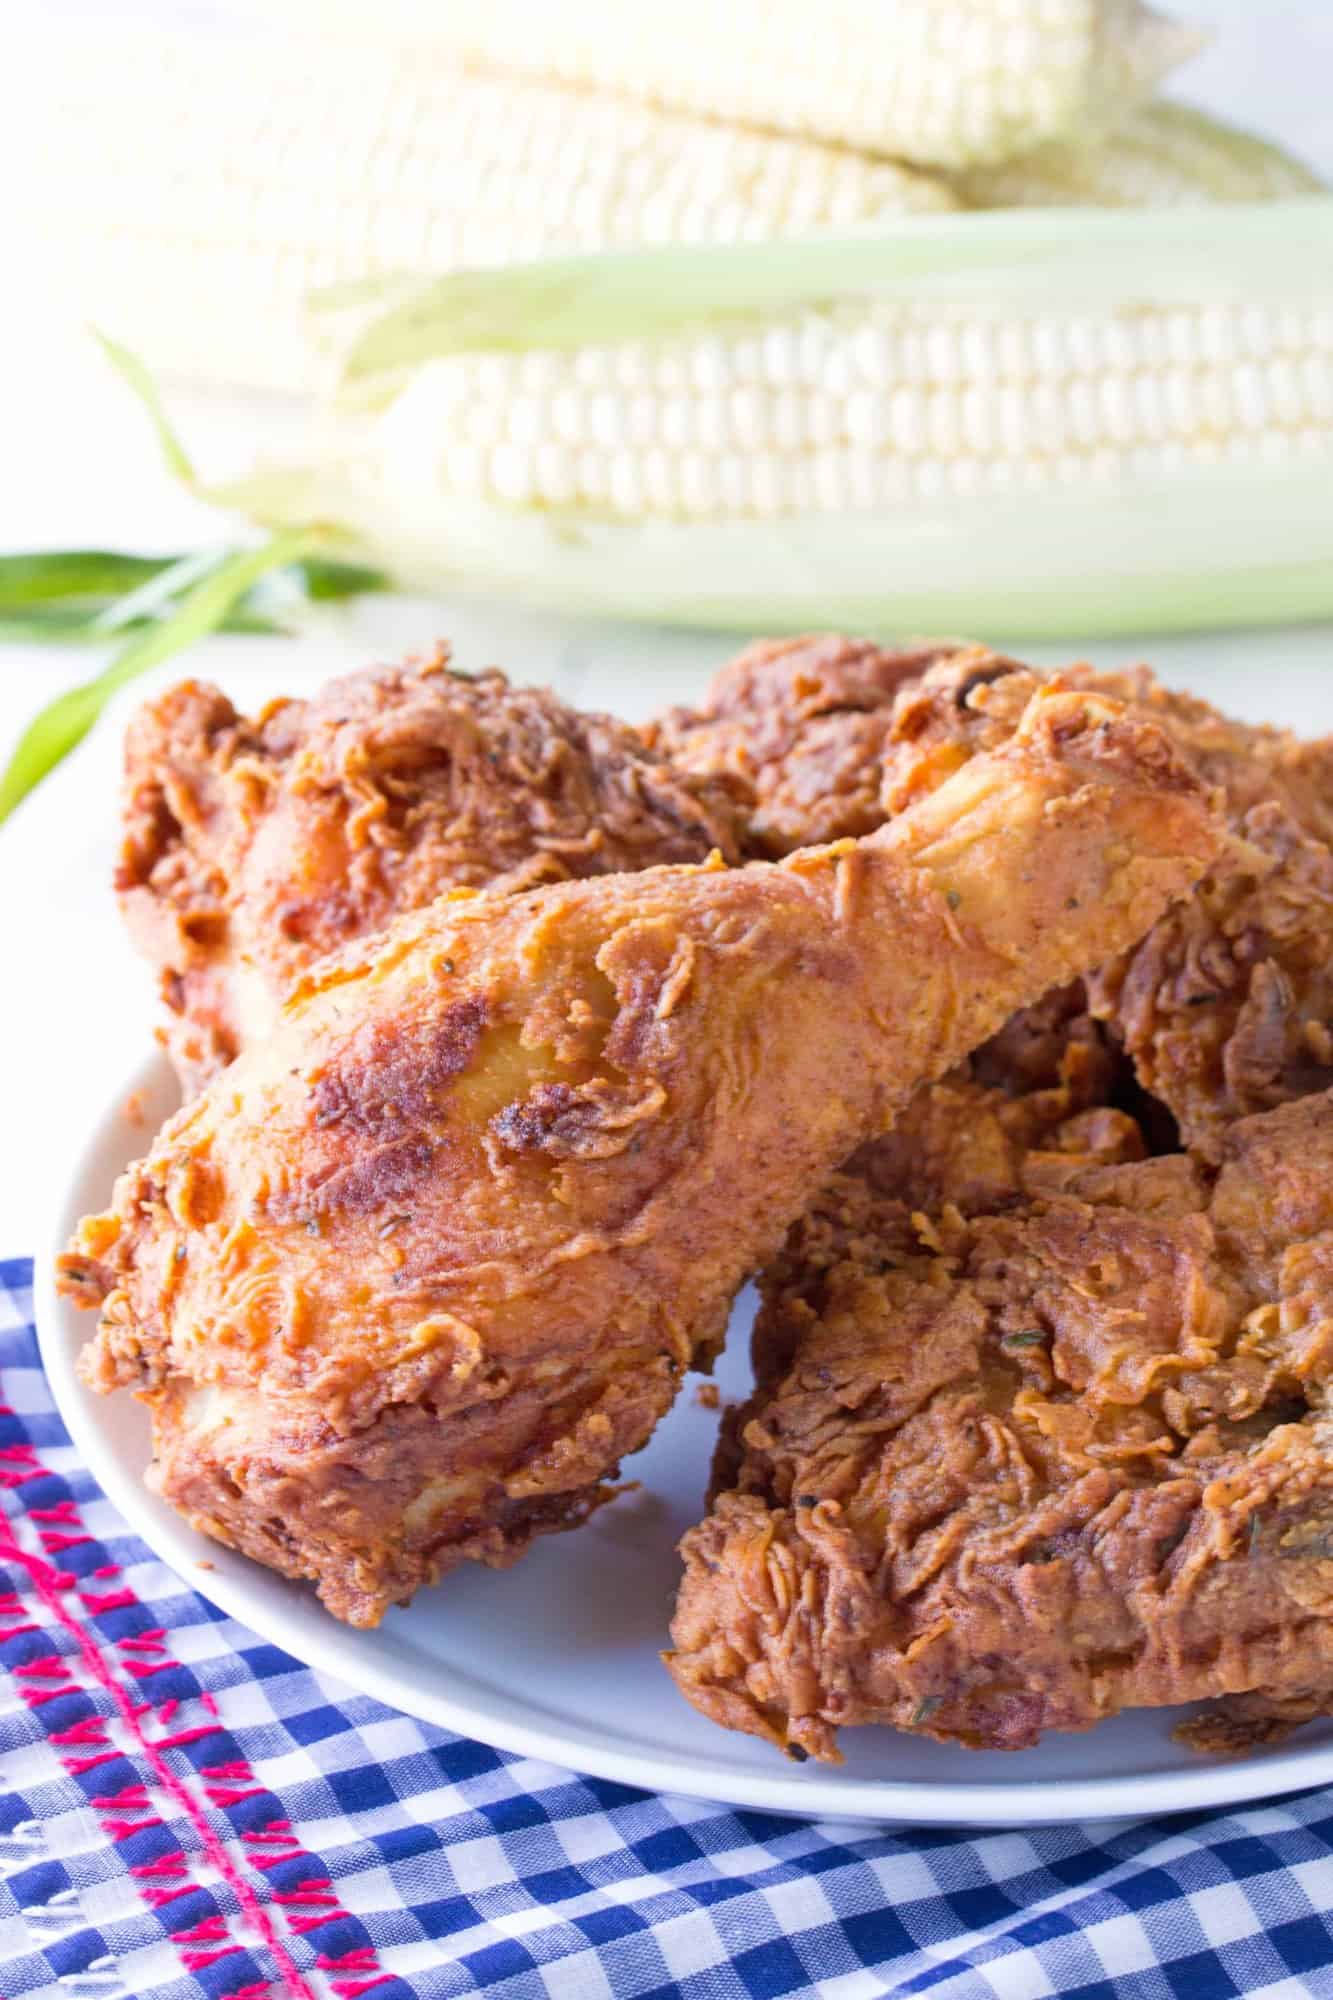 A cajun blend of spices makes up the coating on this moist and juicy Cajun Fried Chicken. Learn to fry chicken to perfection.